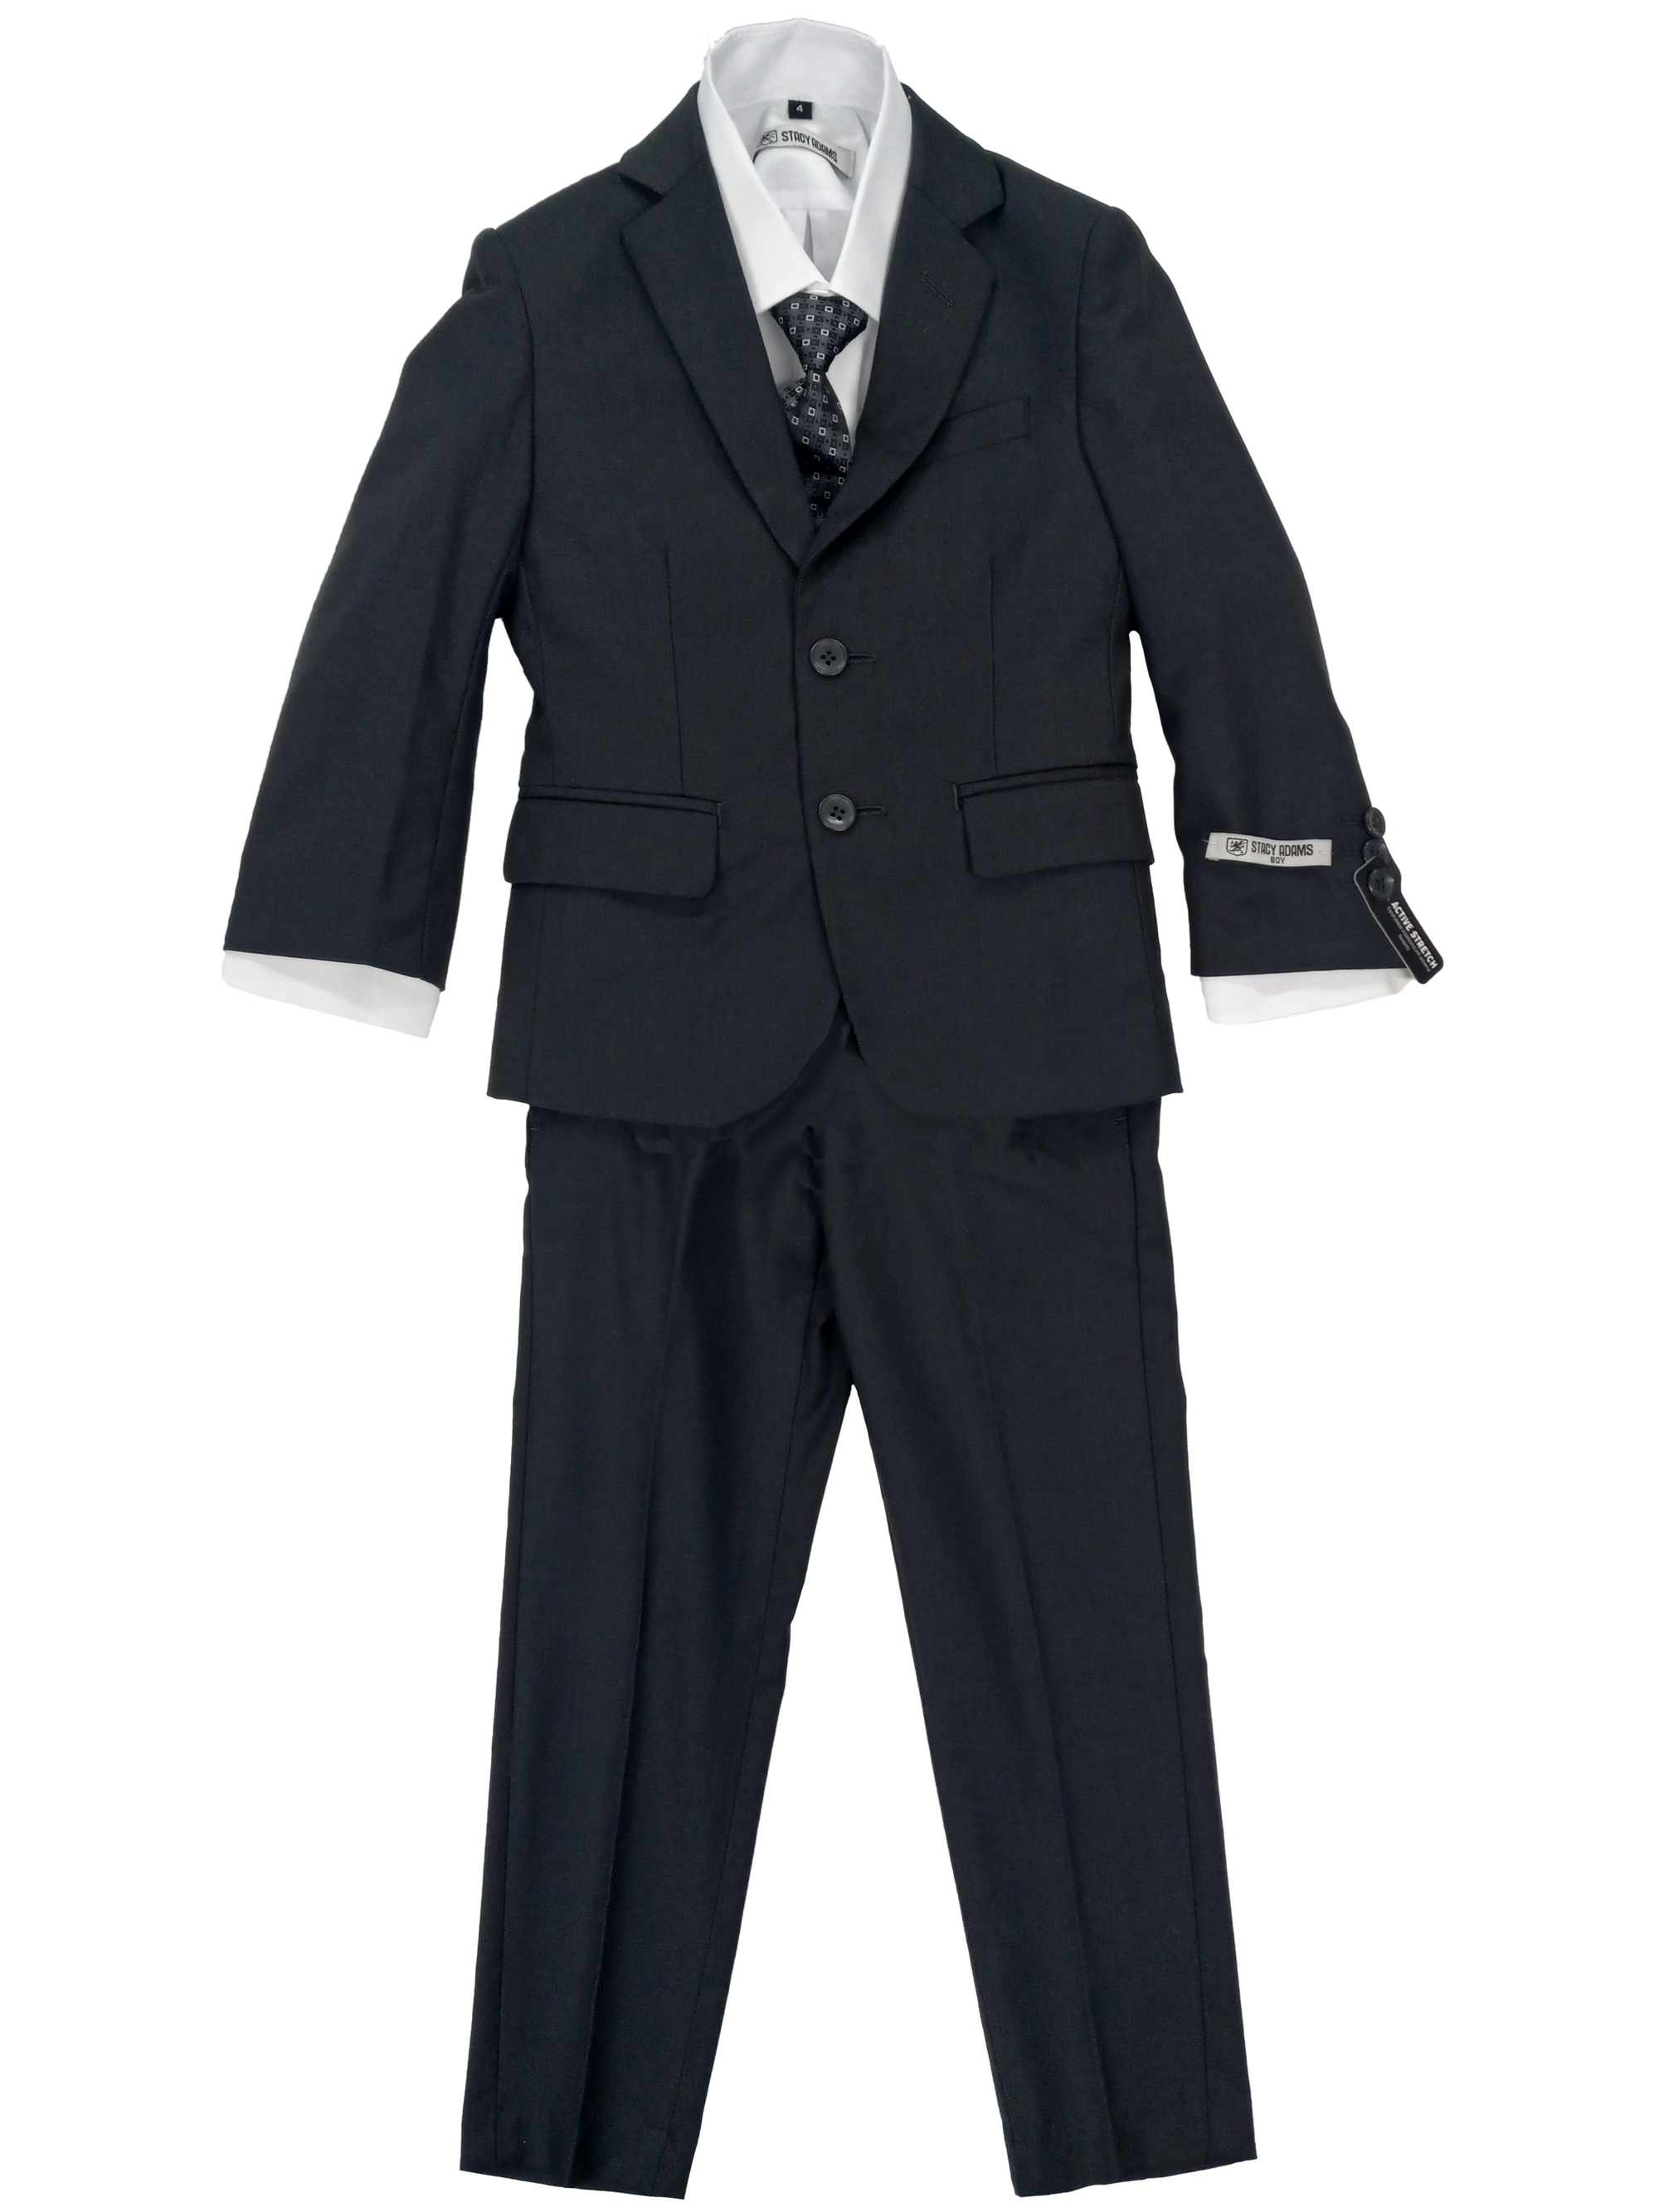 Boy Stacy Adams Charcoal Grey 5 pc Suits